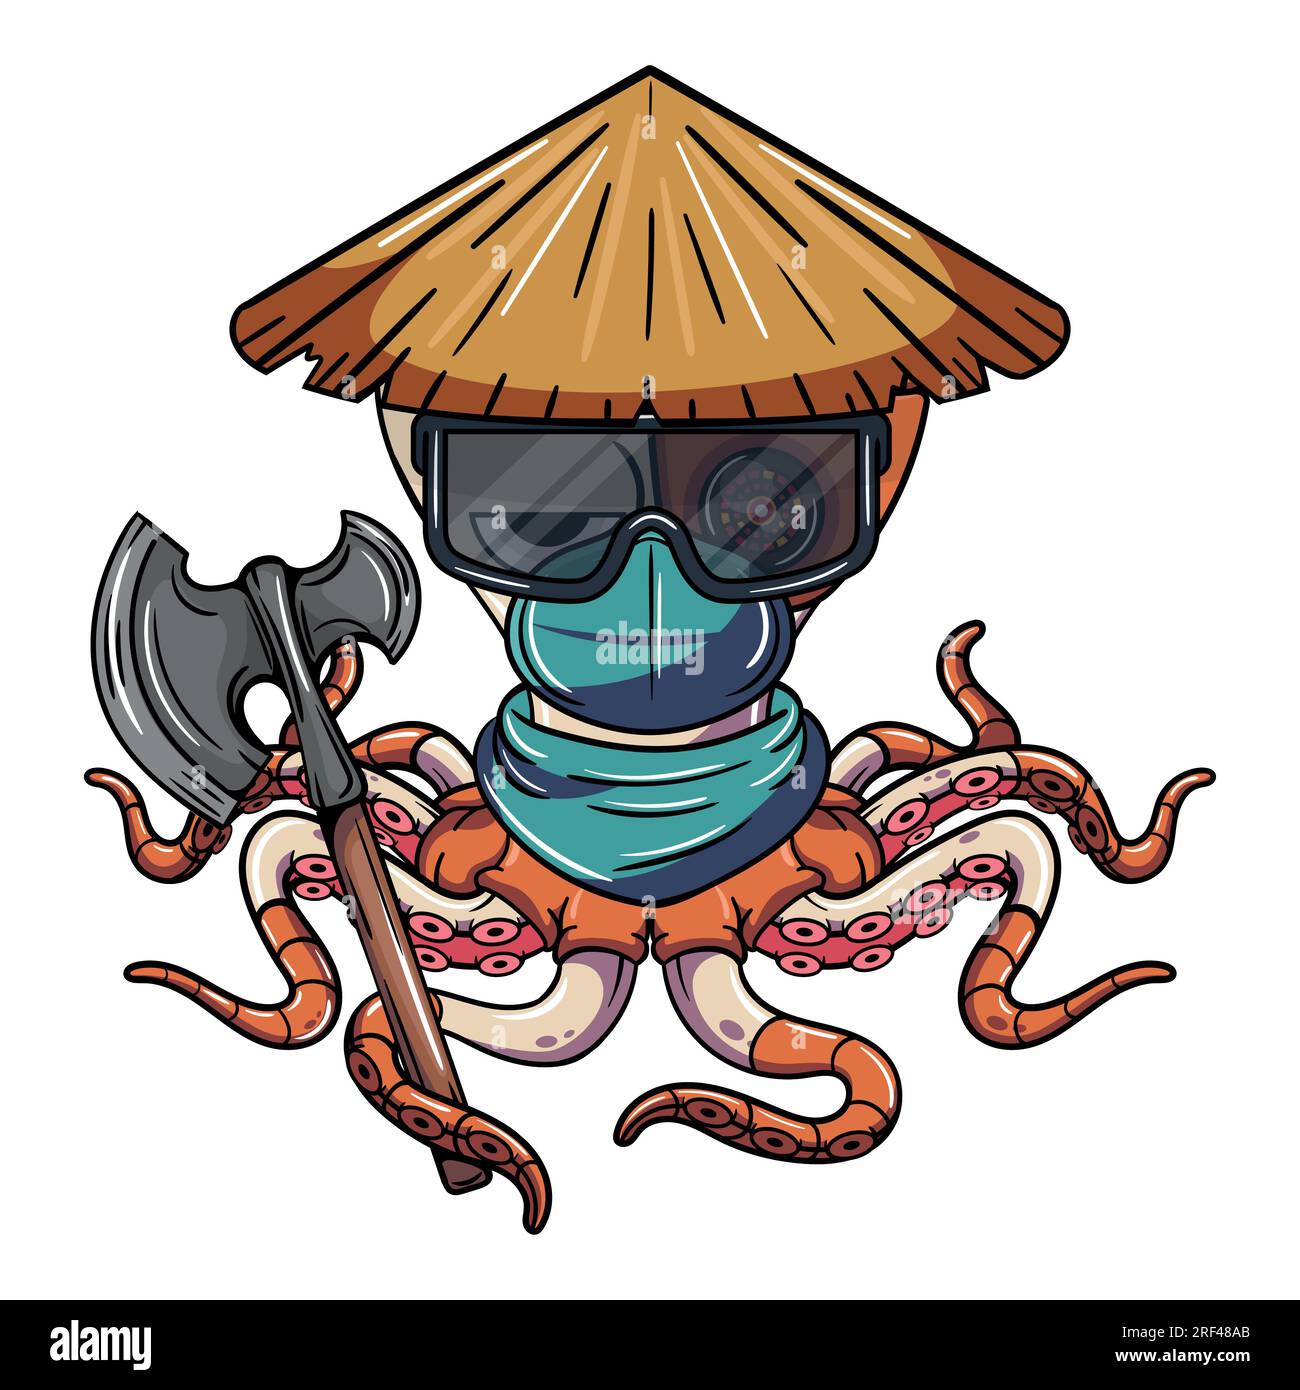 Cartoon cyborg octopus character with Chinese hat, a war axe, glasses and a face mask. Illustration for fantasy, science fiction and adventure comics Stock Vector